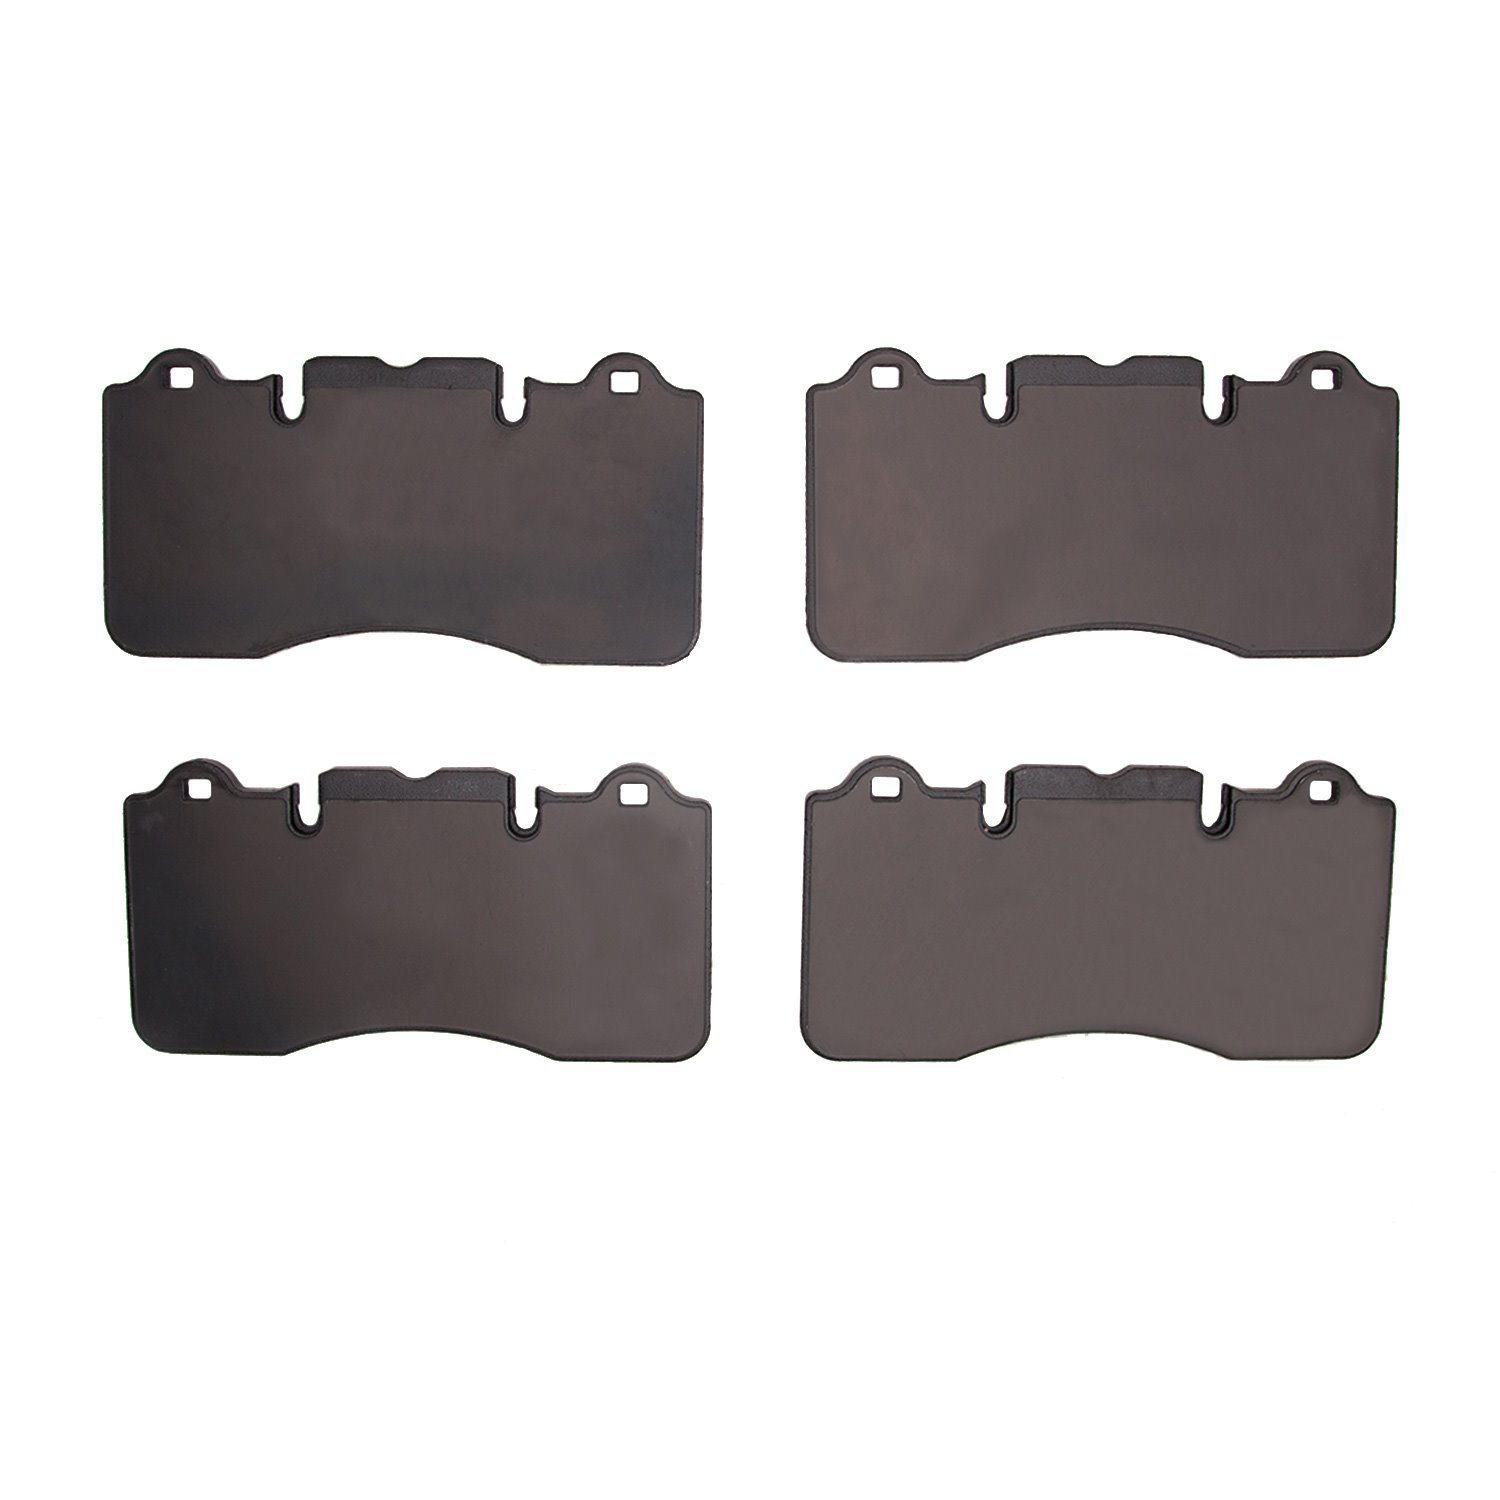 1551-1918-00 5000 Advanced Low-Metallic Brake Pads, 2016-2021 Multiple Makes/Models, Position: Front